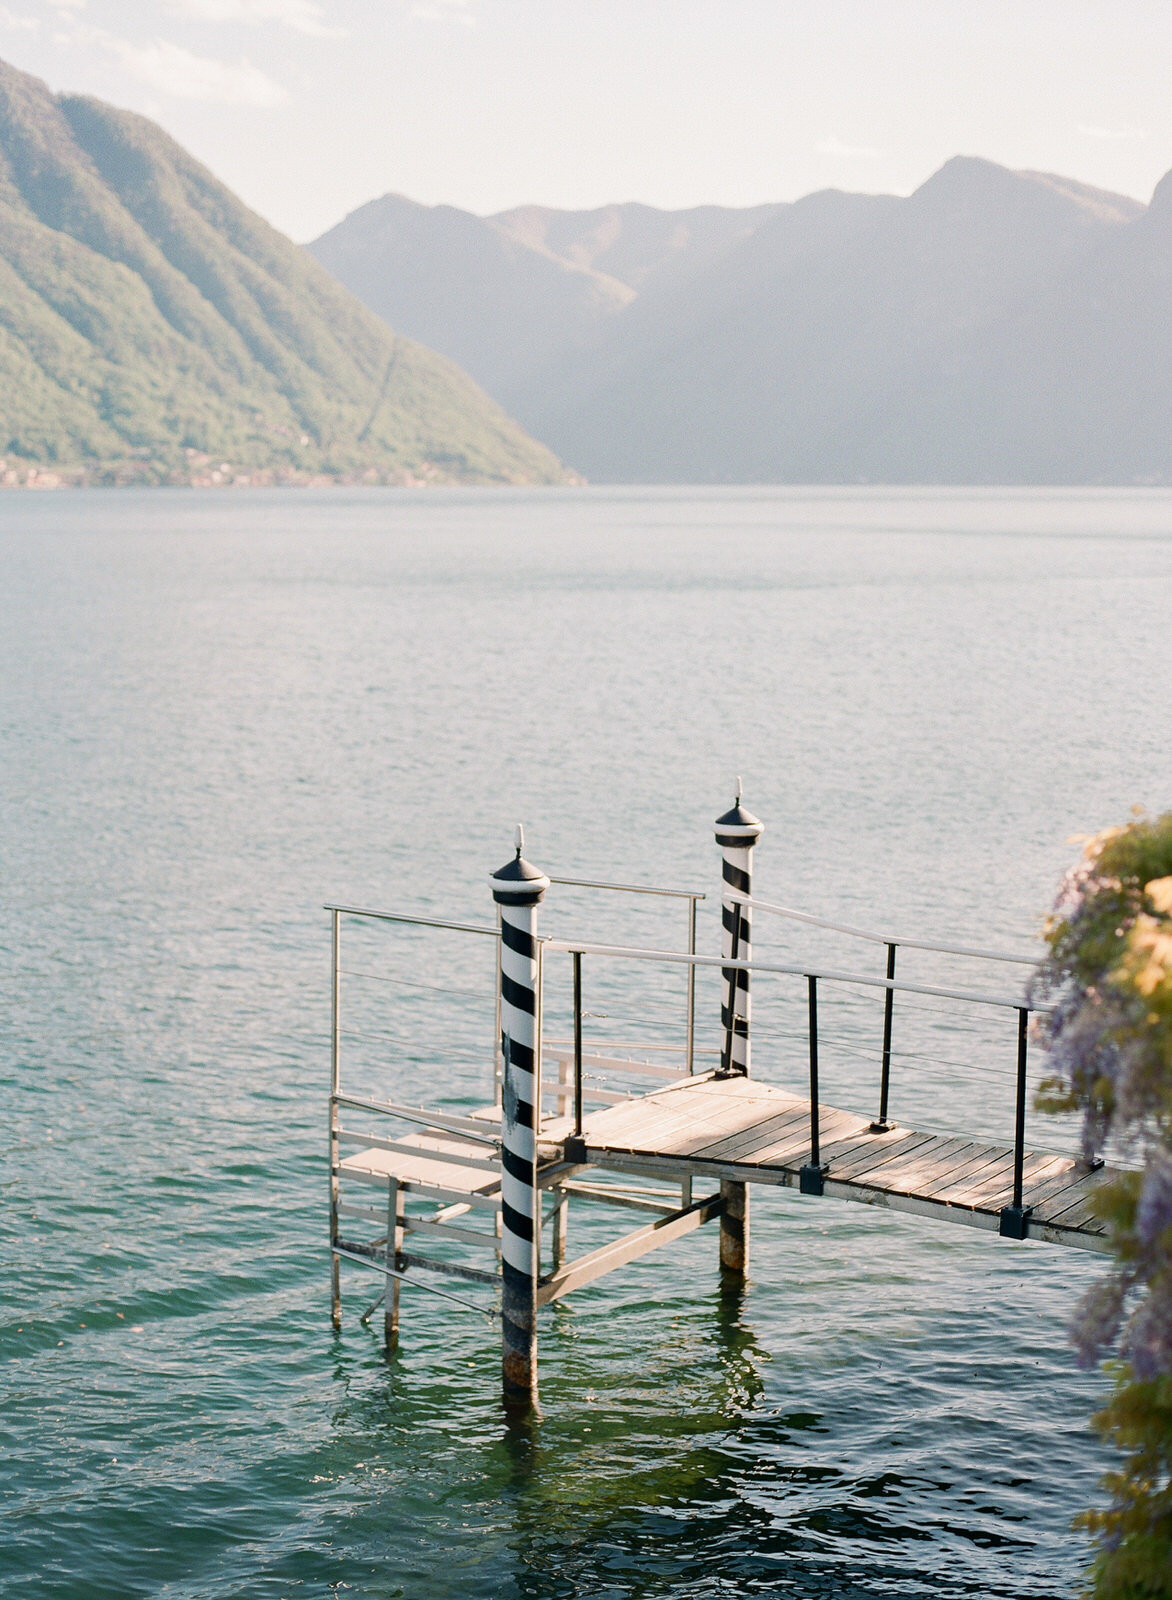 A view of Lake Como in Italy